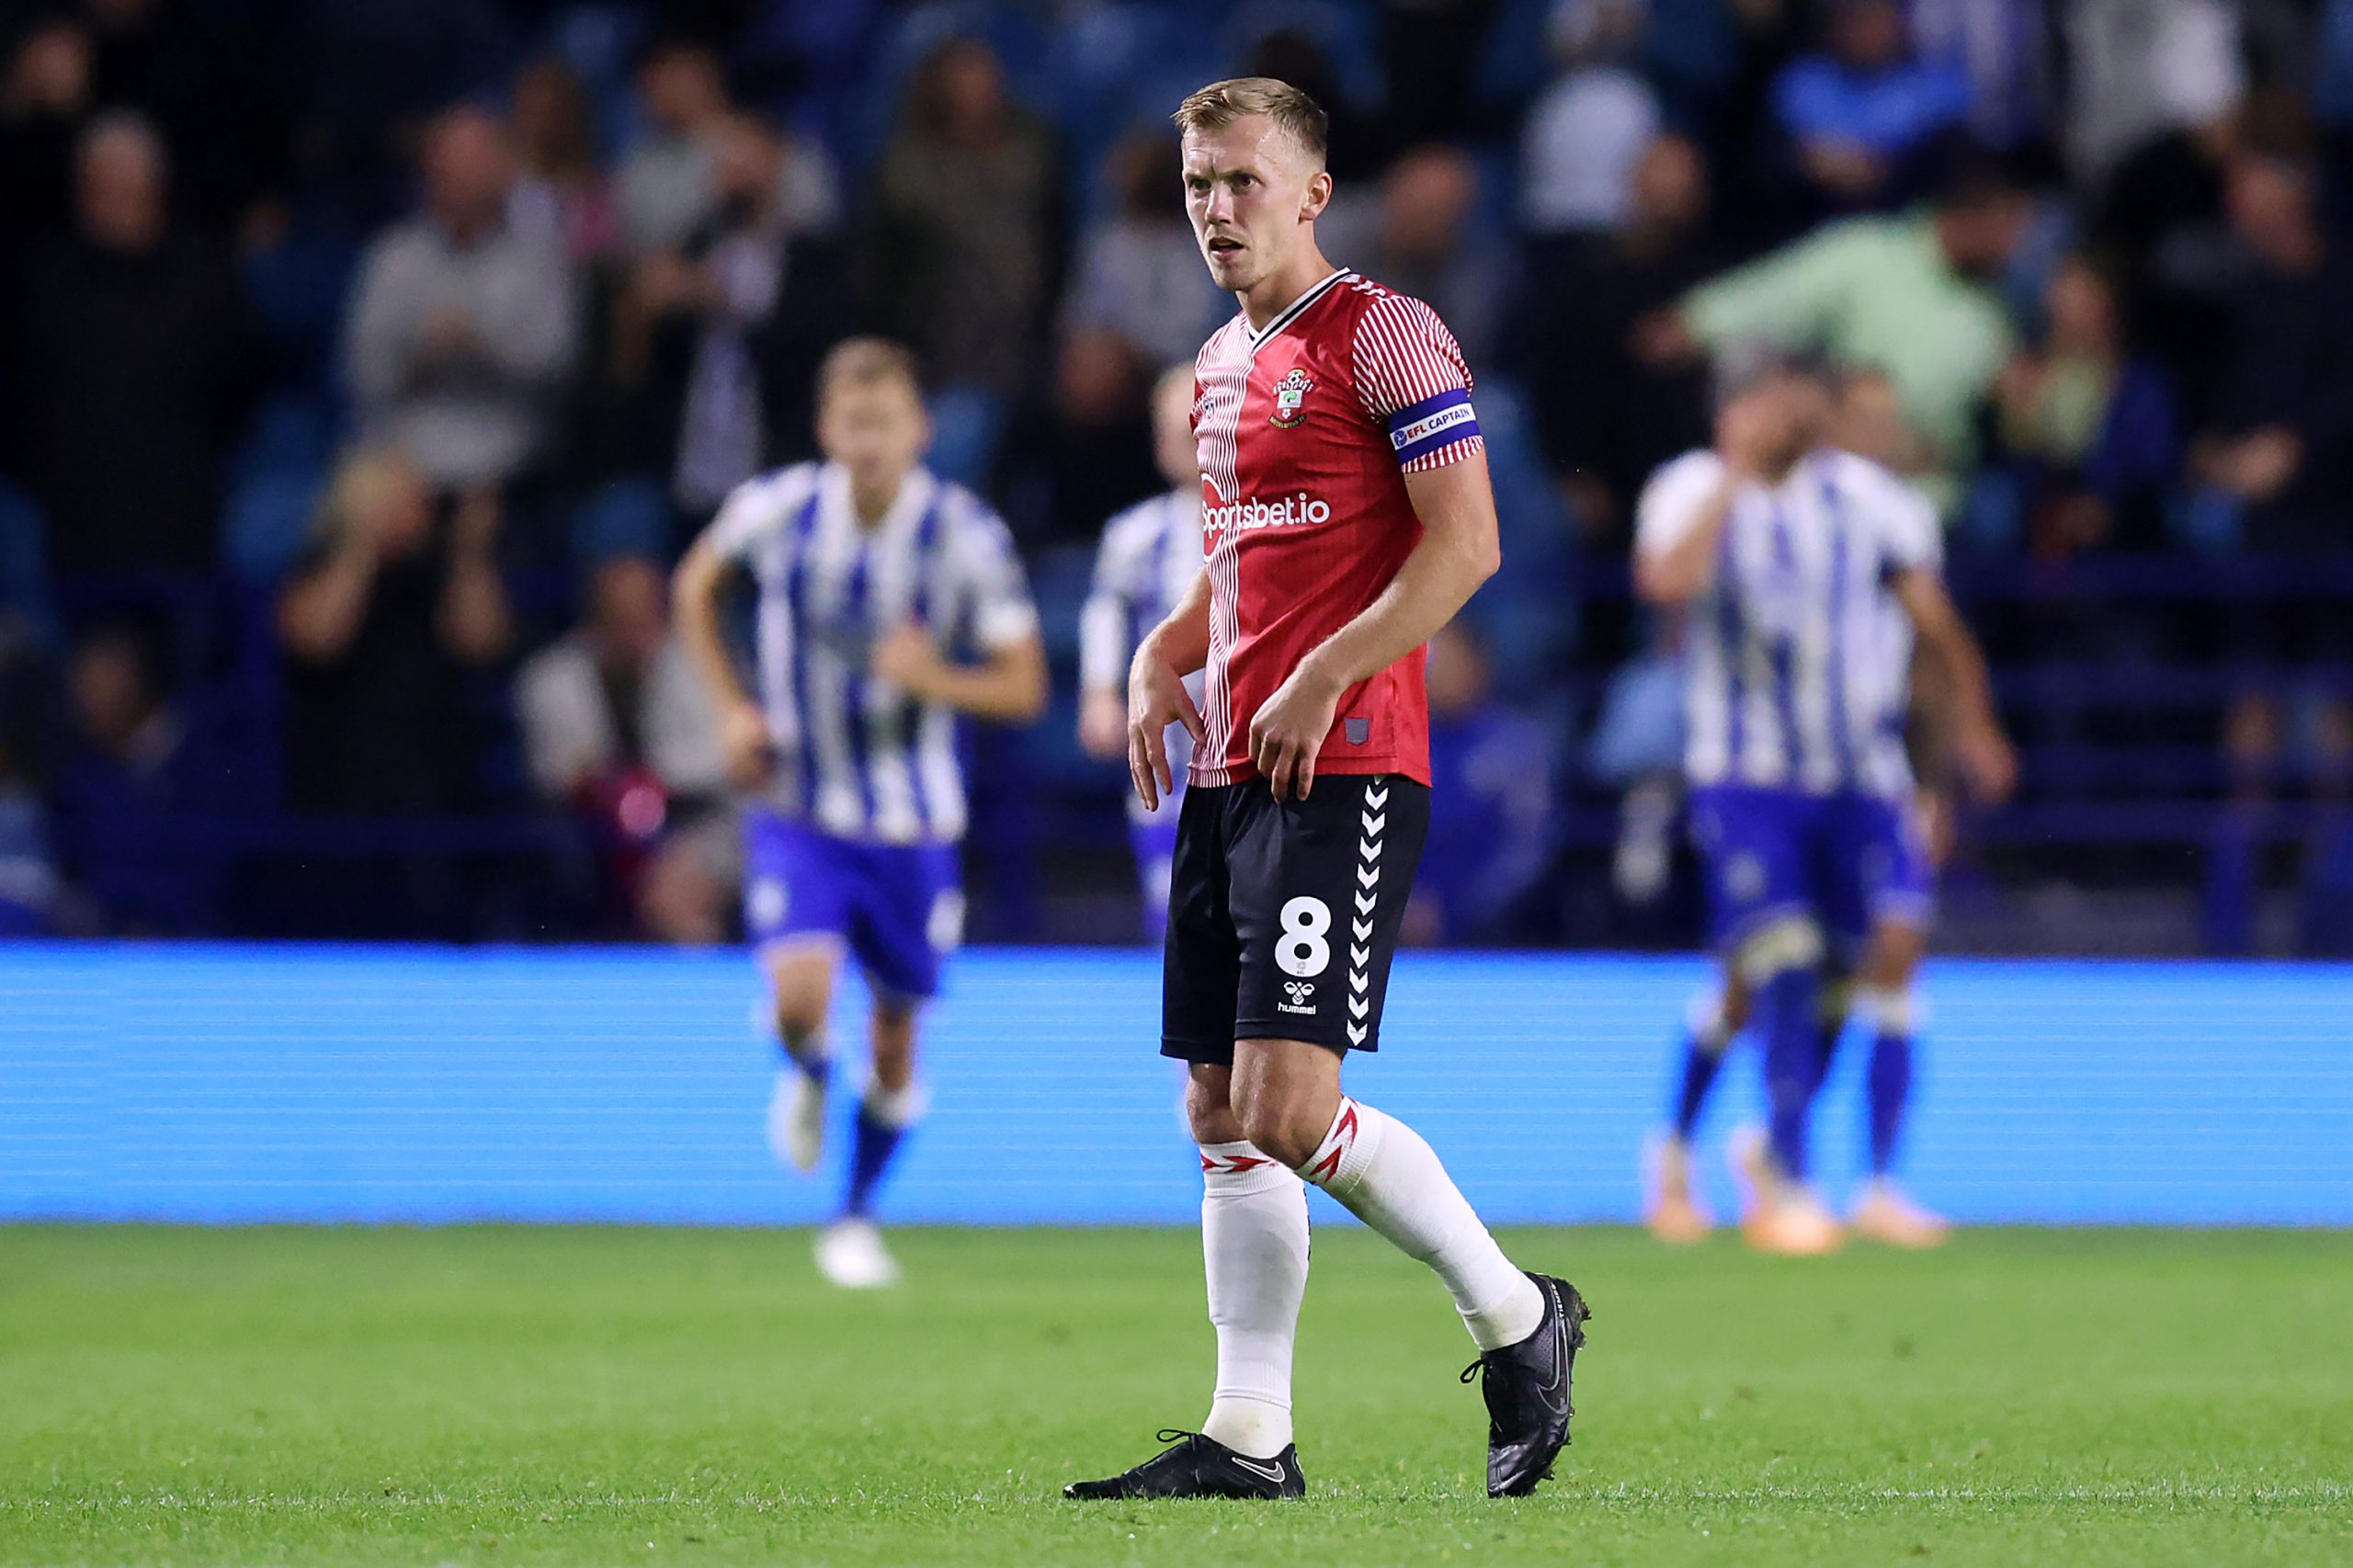 James Ward-Prowse of Southampton looks dejected after his team concede a goal. (Photo by George Wood/Getty Images)